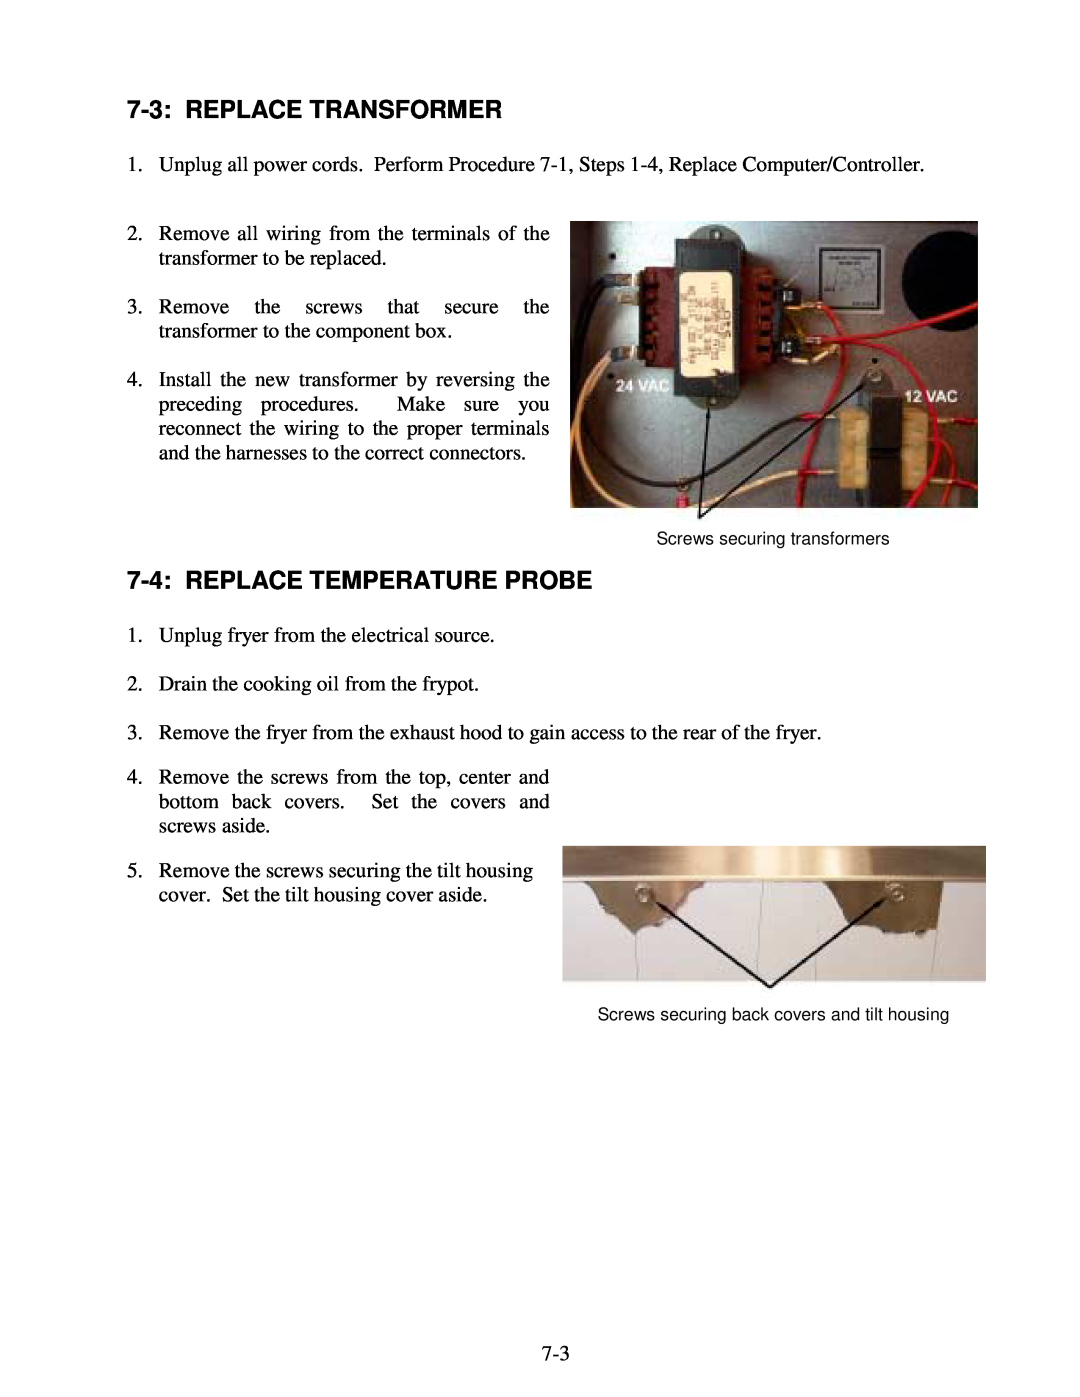 Frymaster H14 Series service manual Replace Transformer, Replace Temperature Probe, Screws securing transformers 